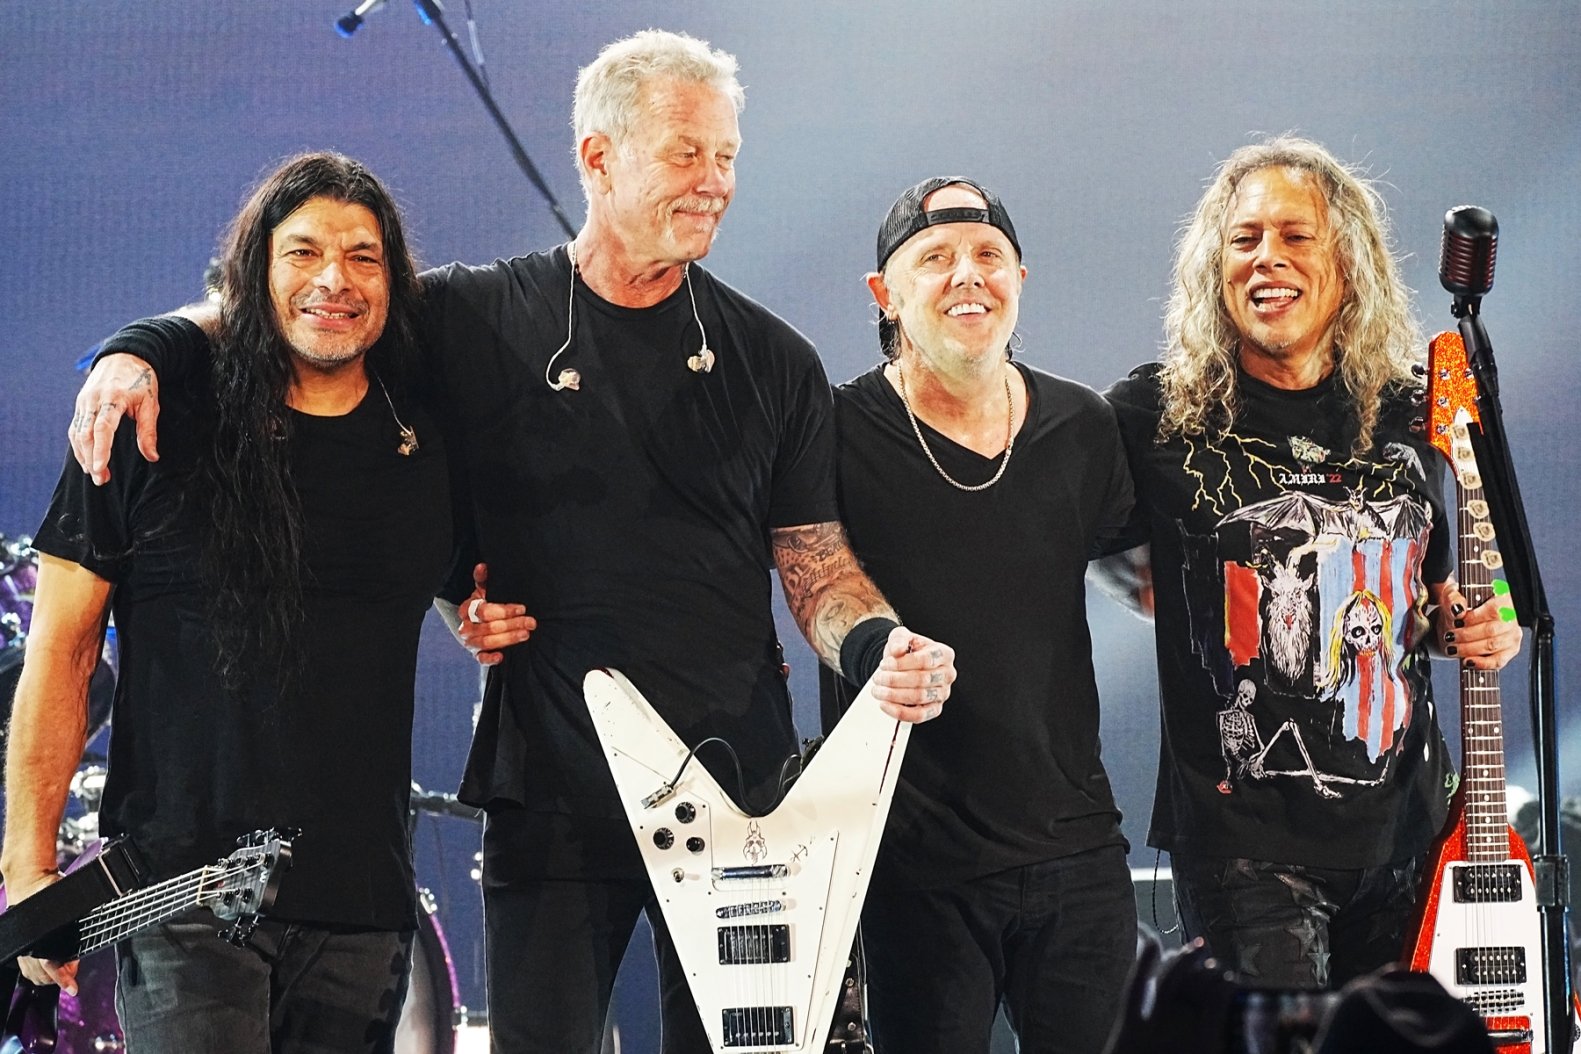 Group picture of Metallica band members on Stage